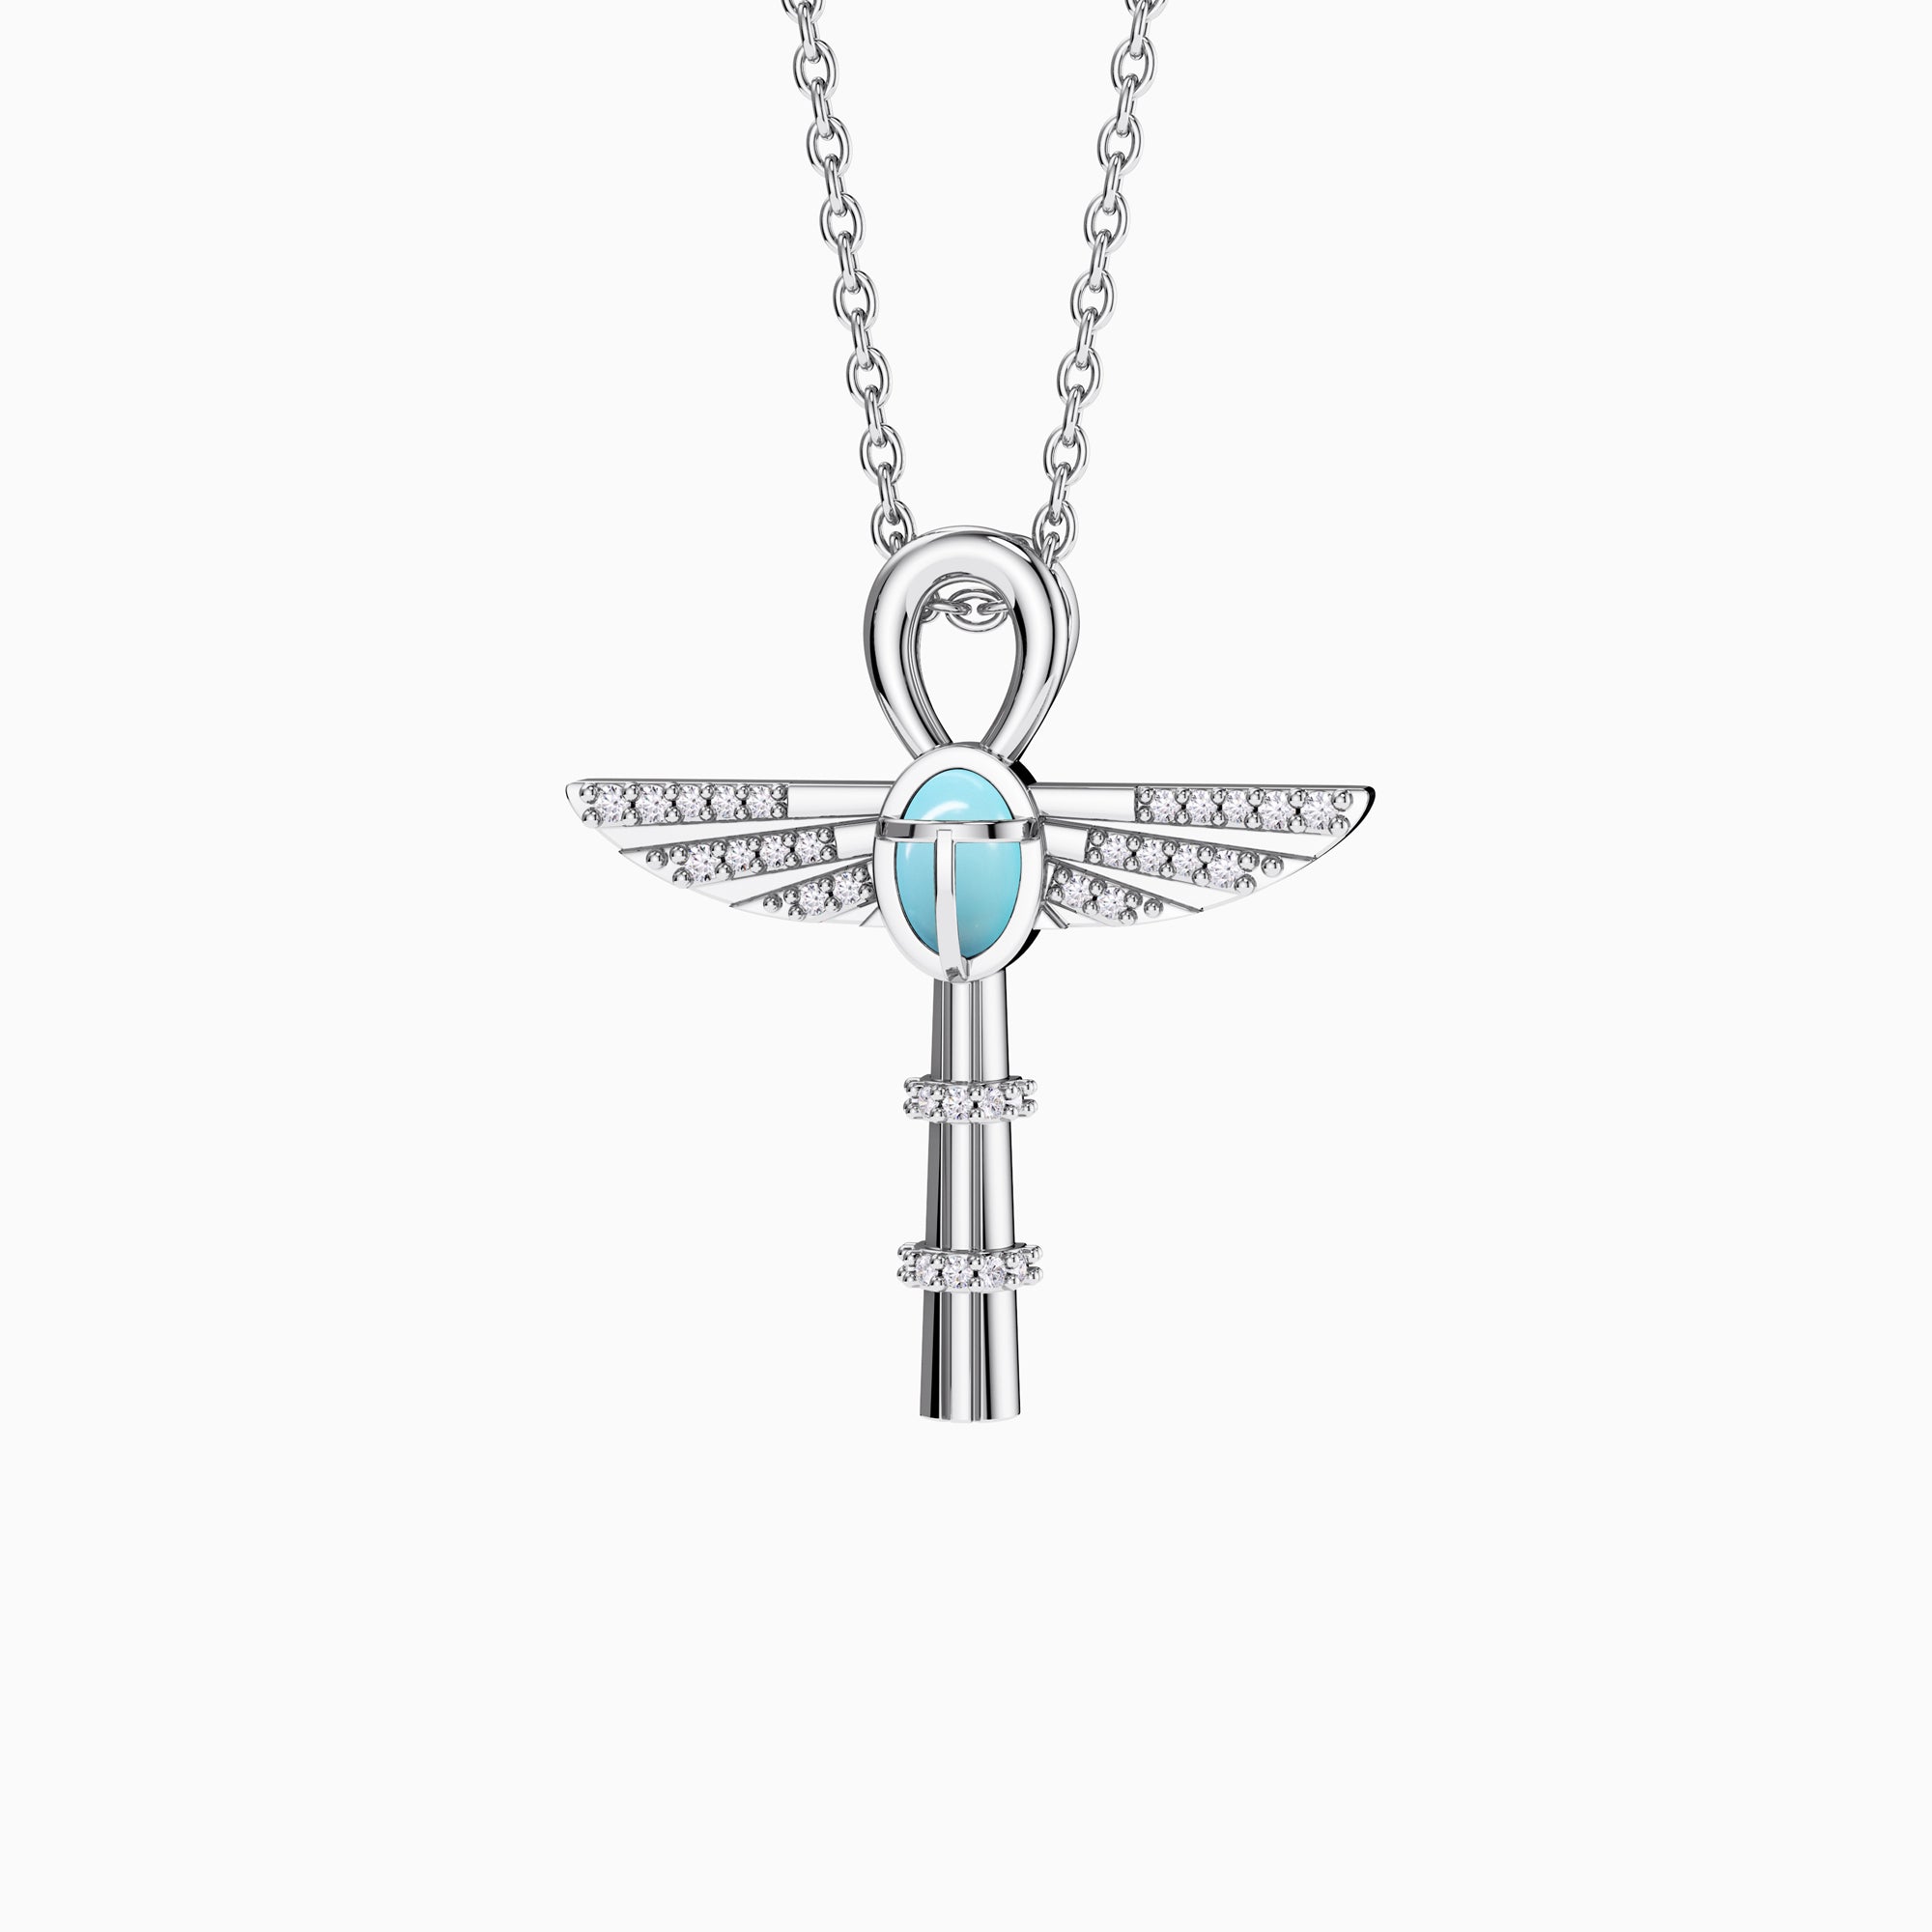 Eternal Guardian Ankh Scarab Turquoise Egyptian Scepter Protection Amulet Pendant Necklace - vanimy